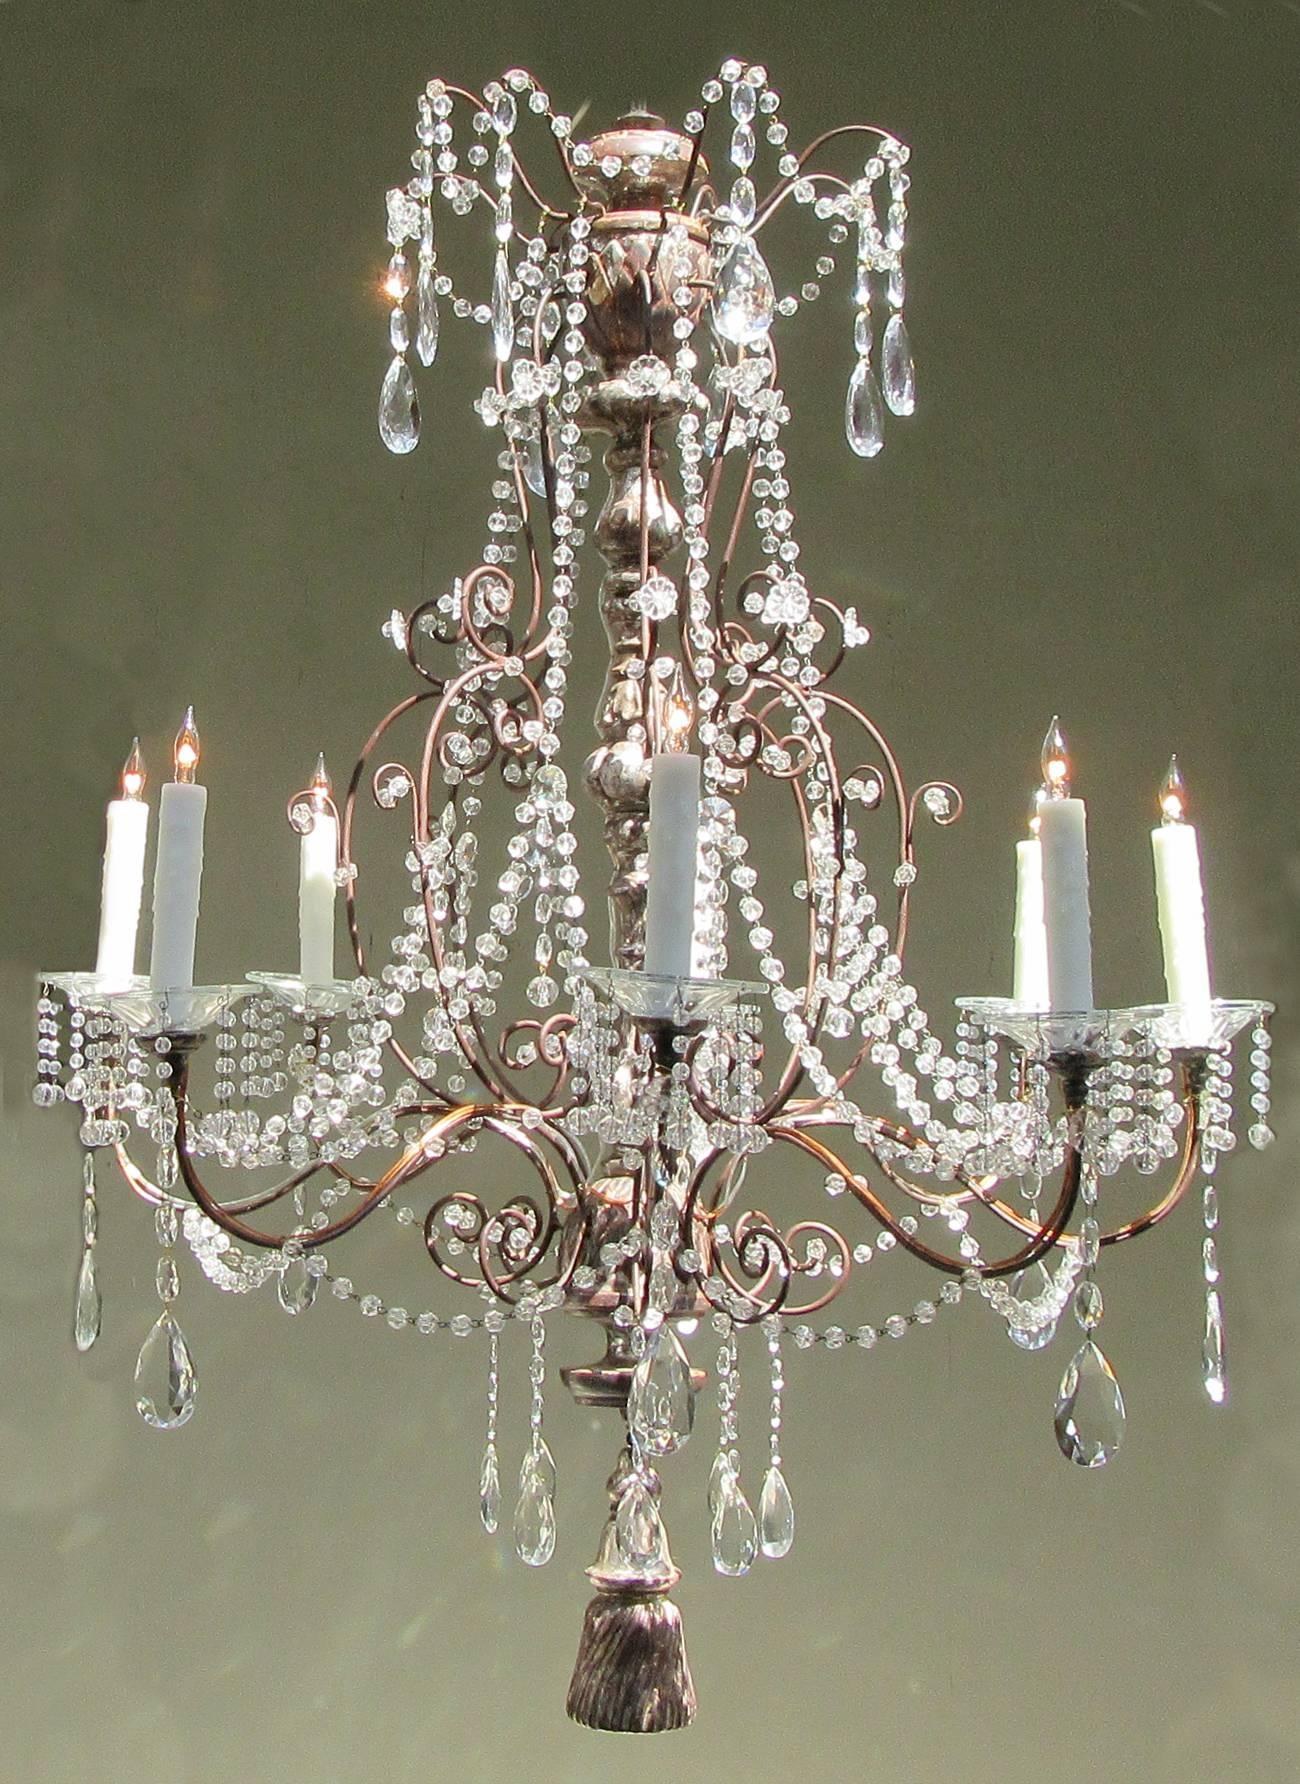 A large early 19th century Italian Baroque crystal chandelier, circa 1810, with silvered carved wood stem, eight tole candle arms with crystal beaded bobeches with large cut crystal pendants and large silvered carved wood tassel. The chandelier has